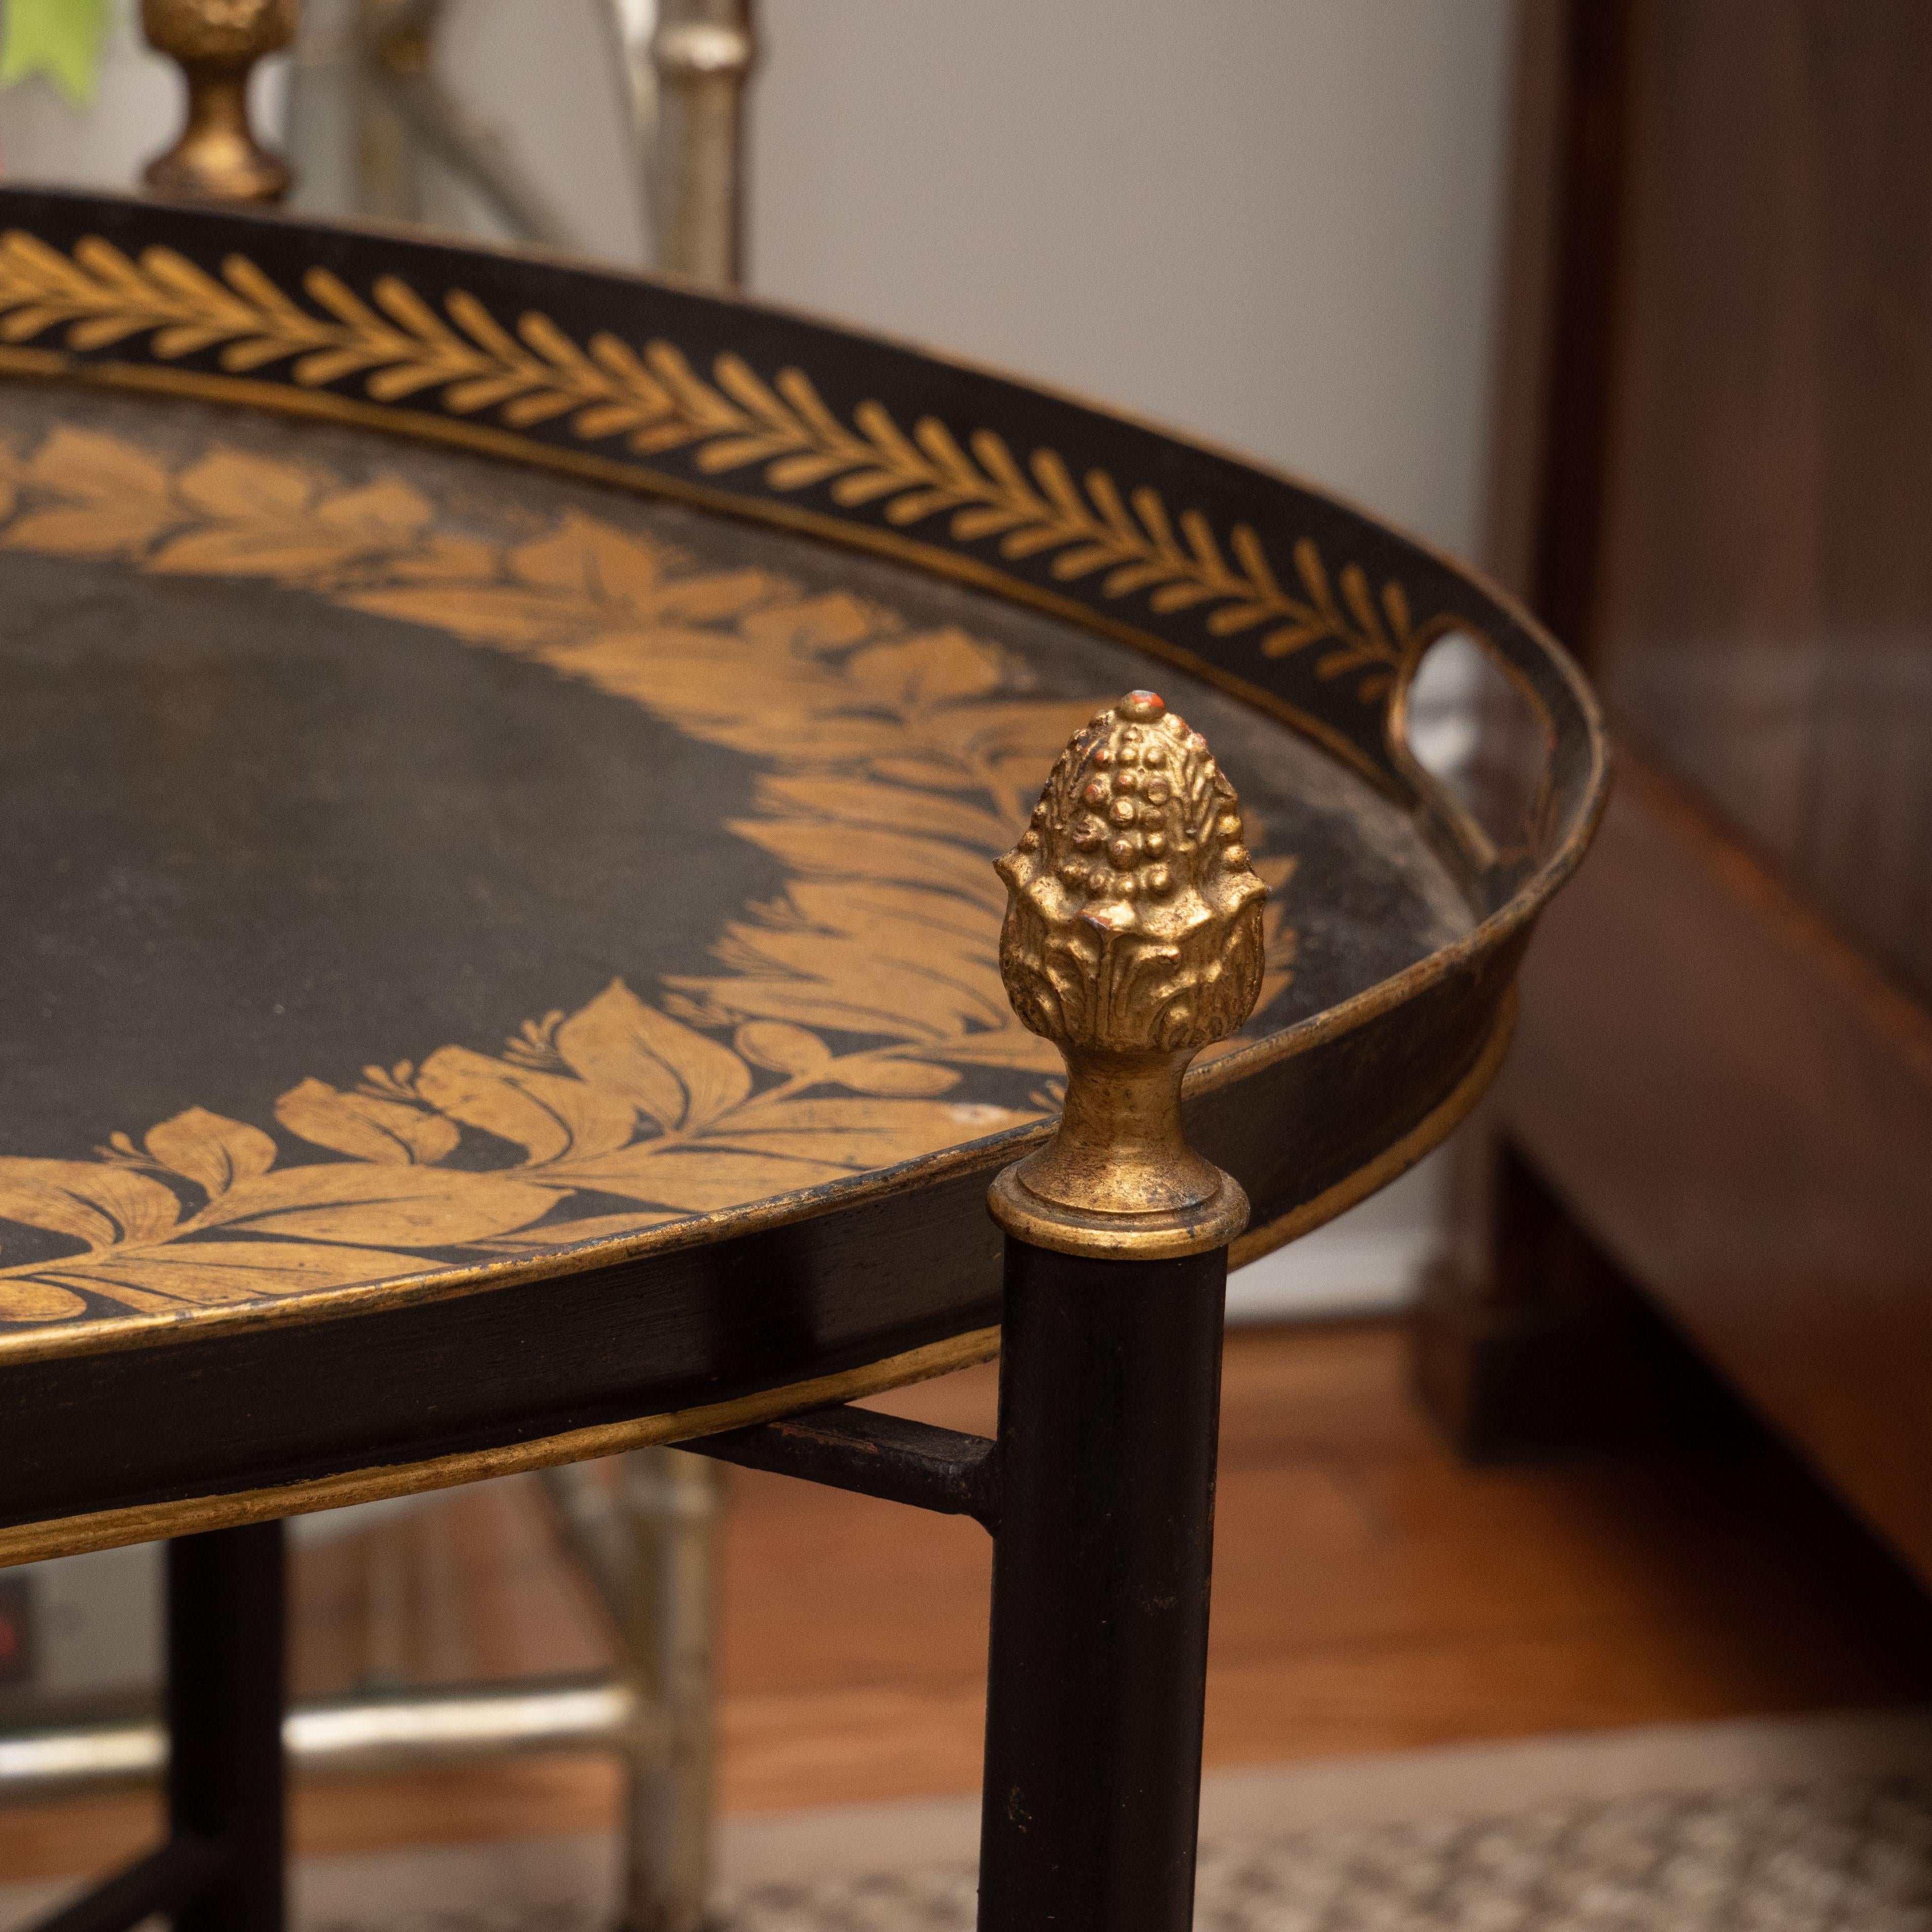 A lovely oval tole tray on a custom stand in black with a hand painted design in gold. The X-form stand features charming pine cone finials. This table is perfect as a side table or between two chairs. Without taking up much space, it adds style and